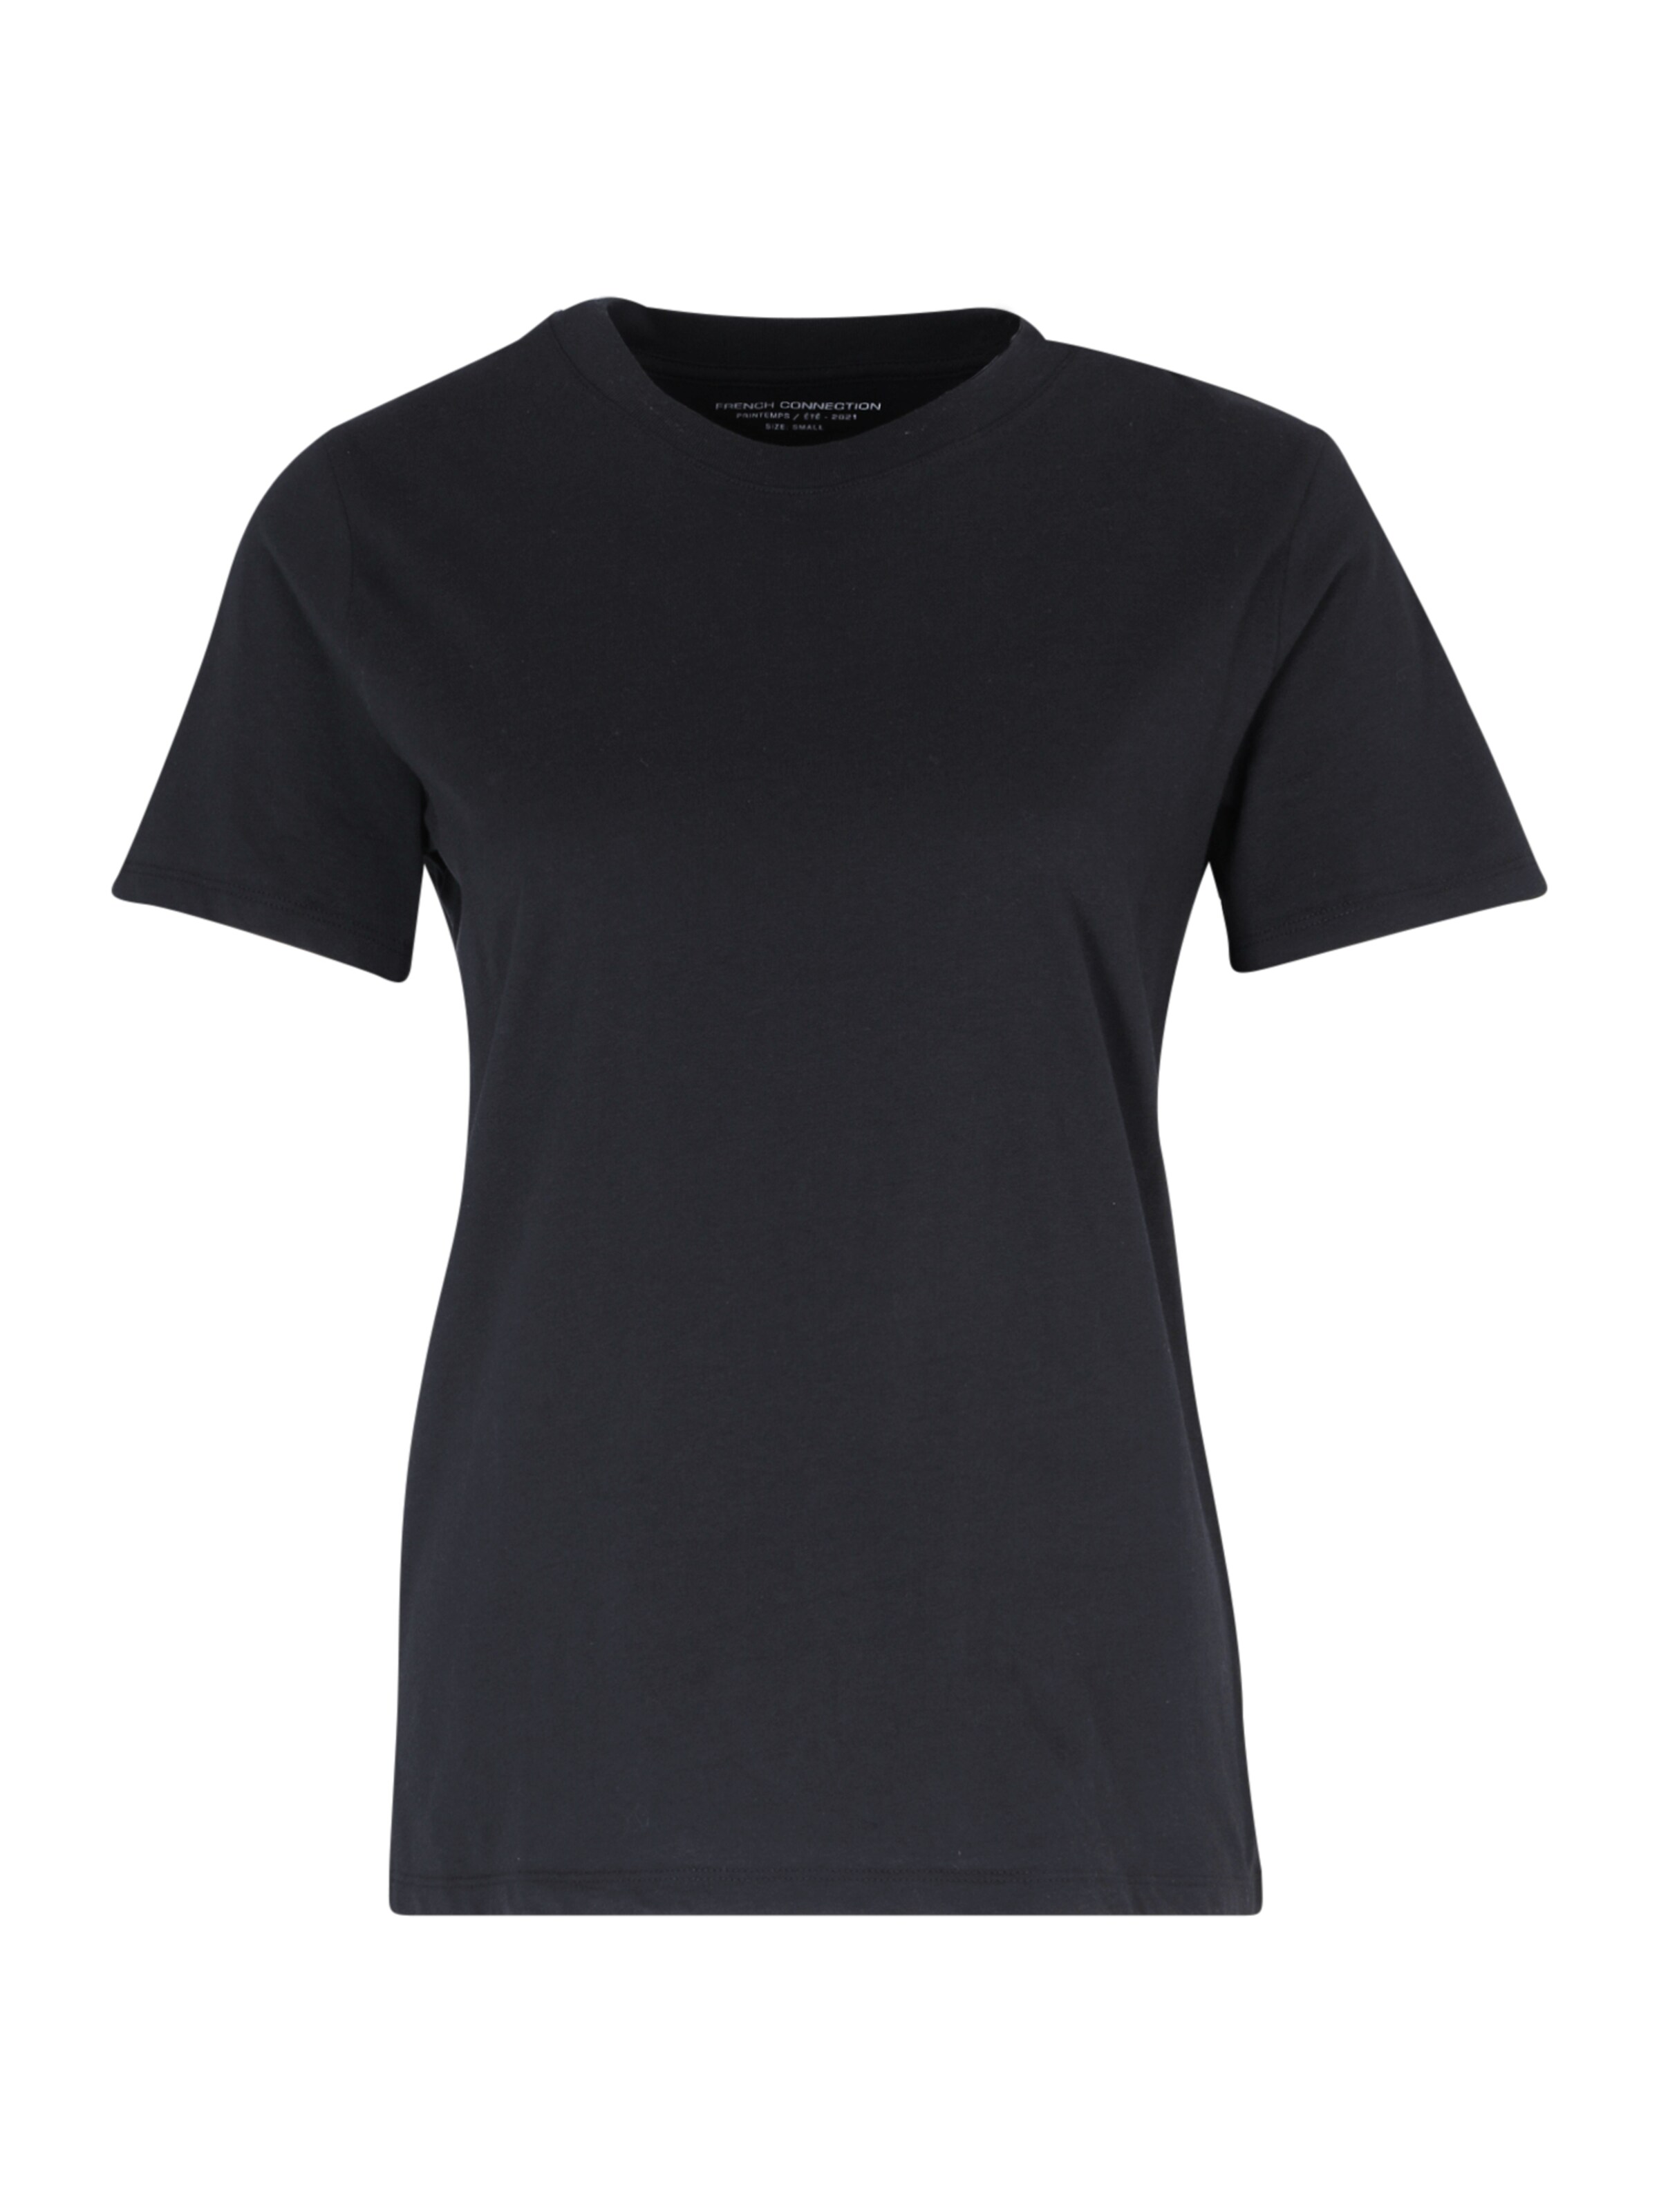 Frauen Shirts & Tops FRENCH CONNECTION T-Shirt in Schwarz - EP60186